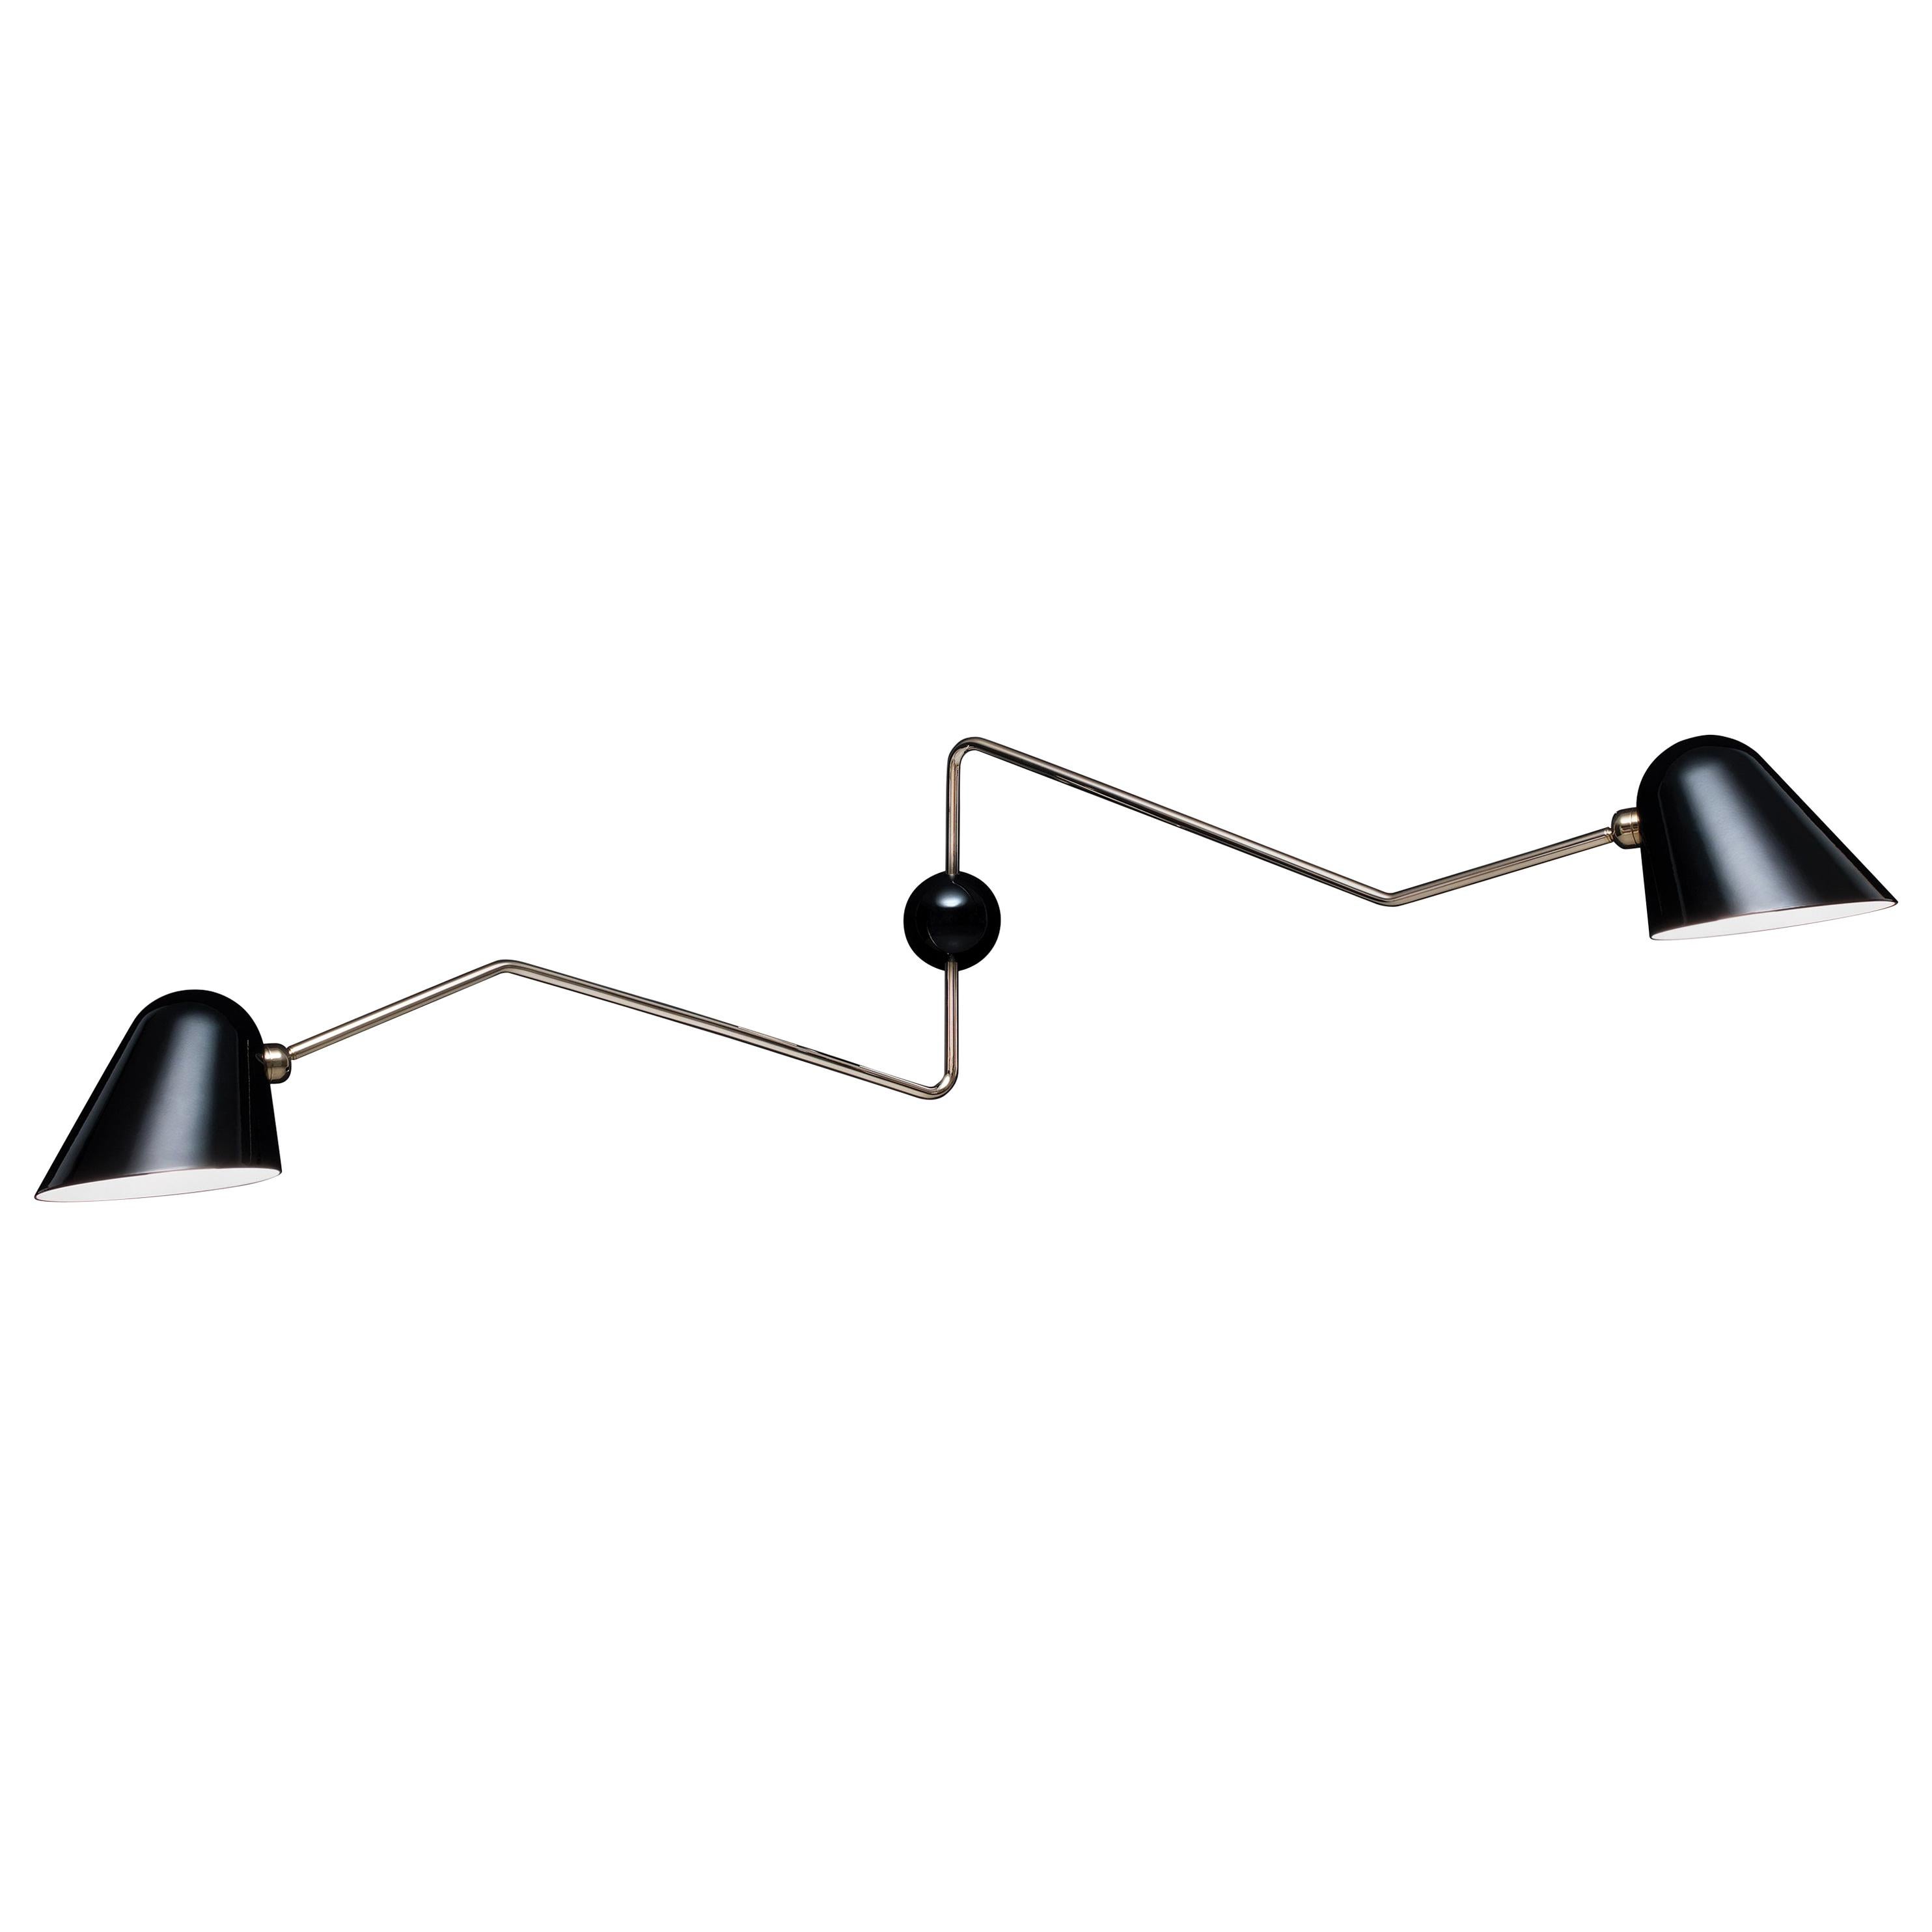 Beghina Due Bracci Wall Light in Black and Brass for Tato Italia For Sale